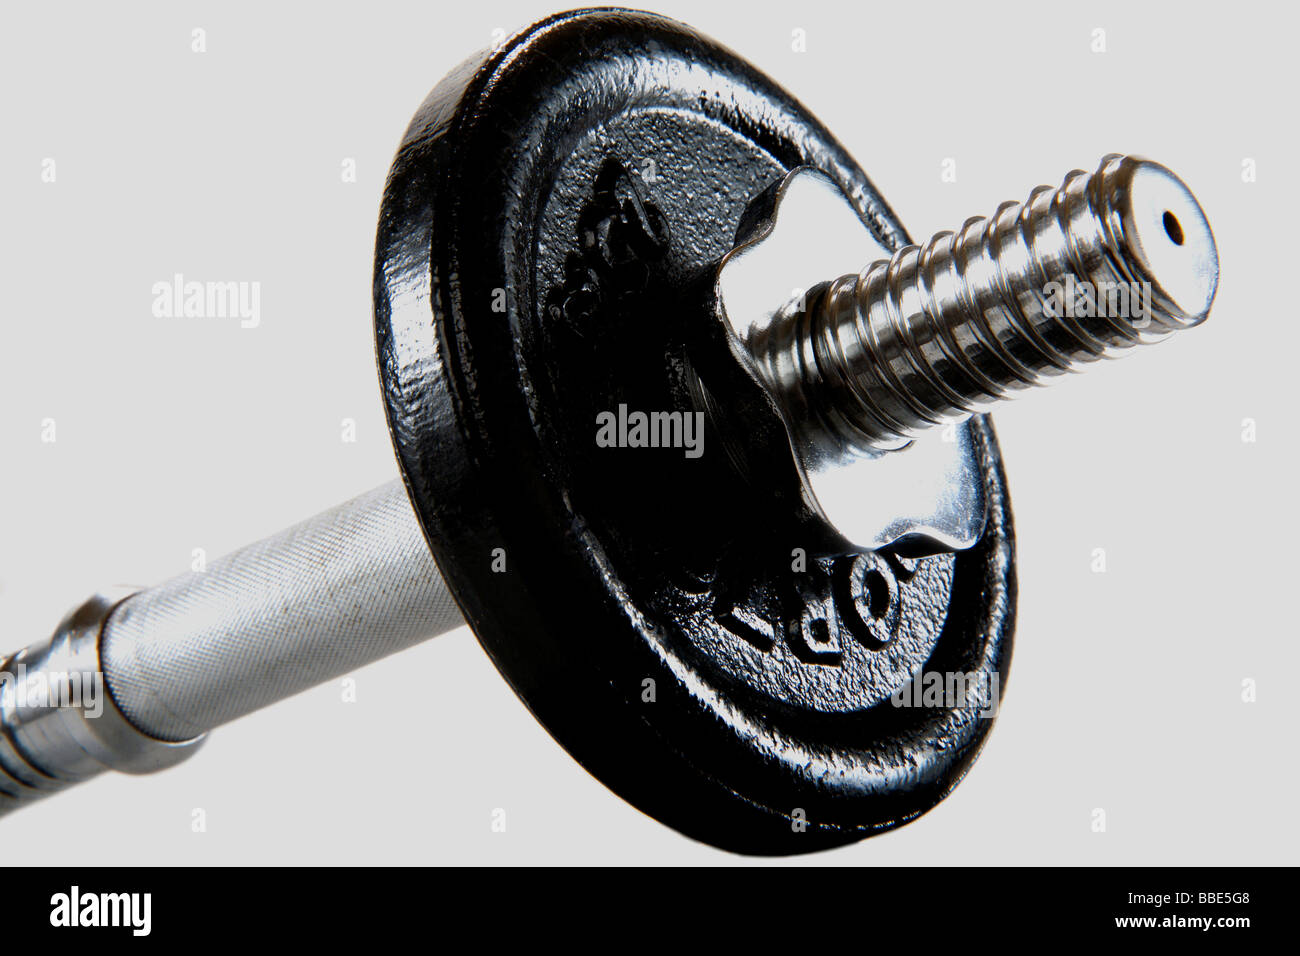 Weight disc of a dumbbell Stock Photo